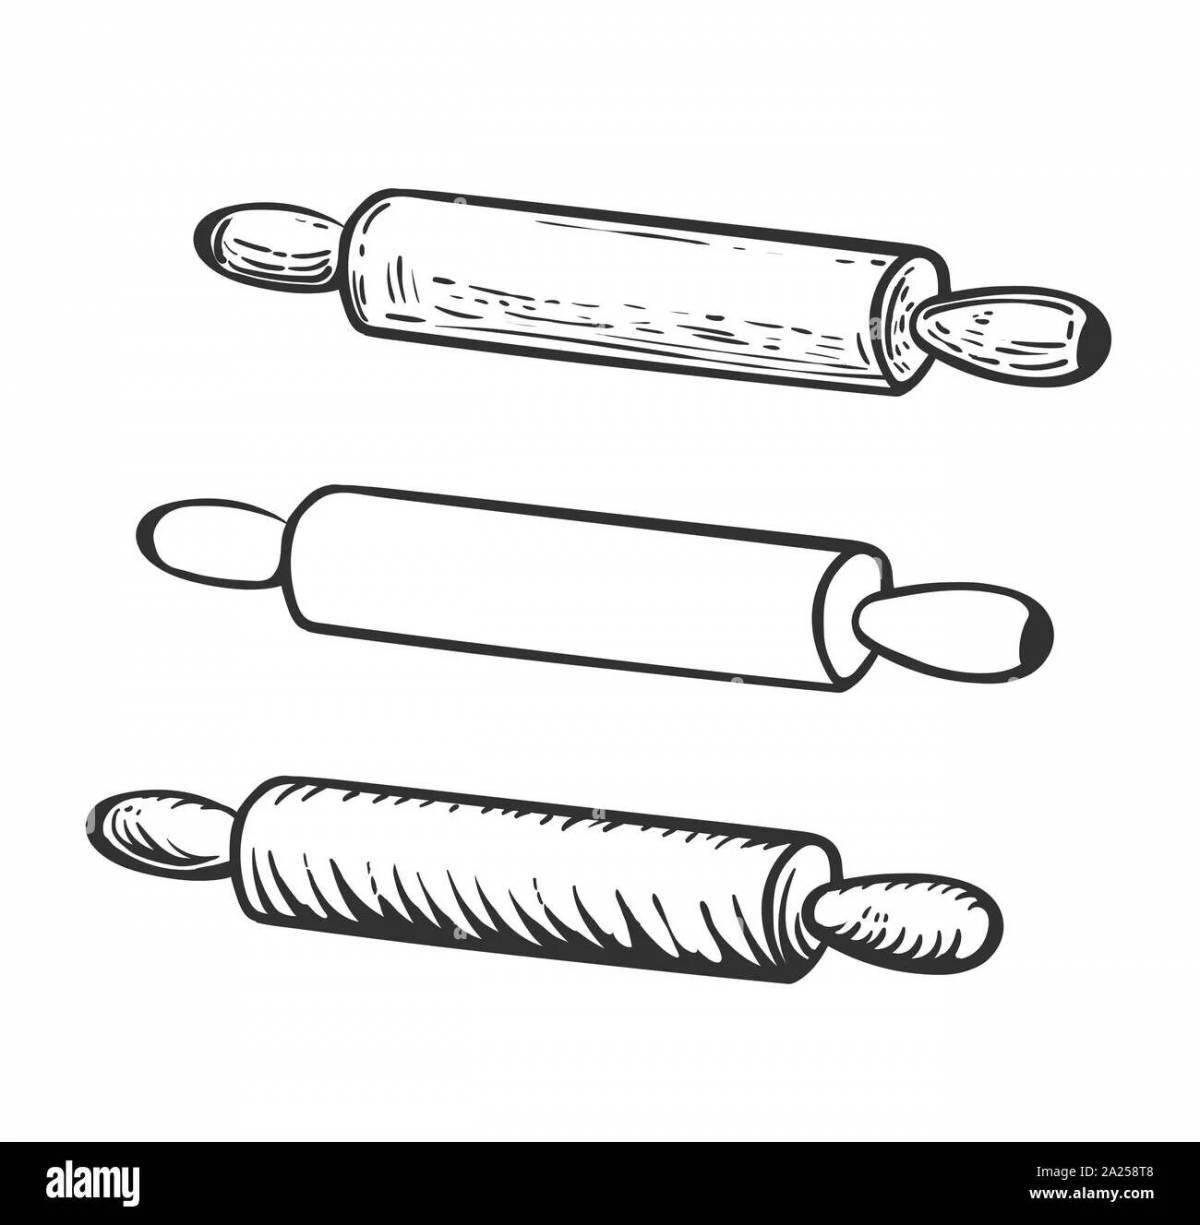 Bold rolling pin coloring book